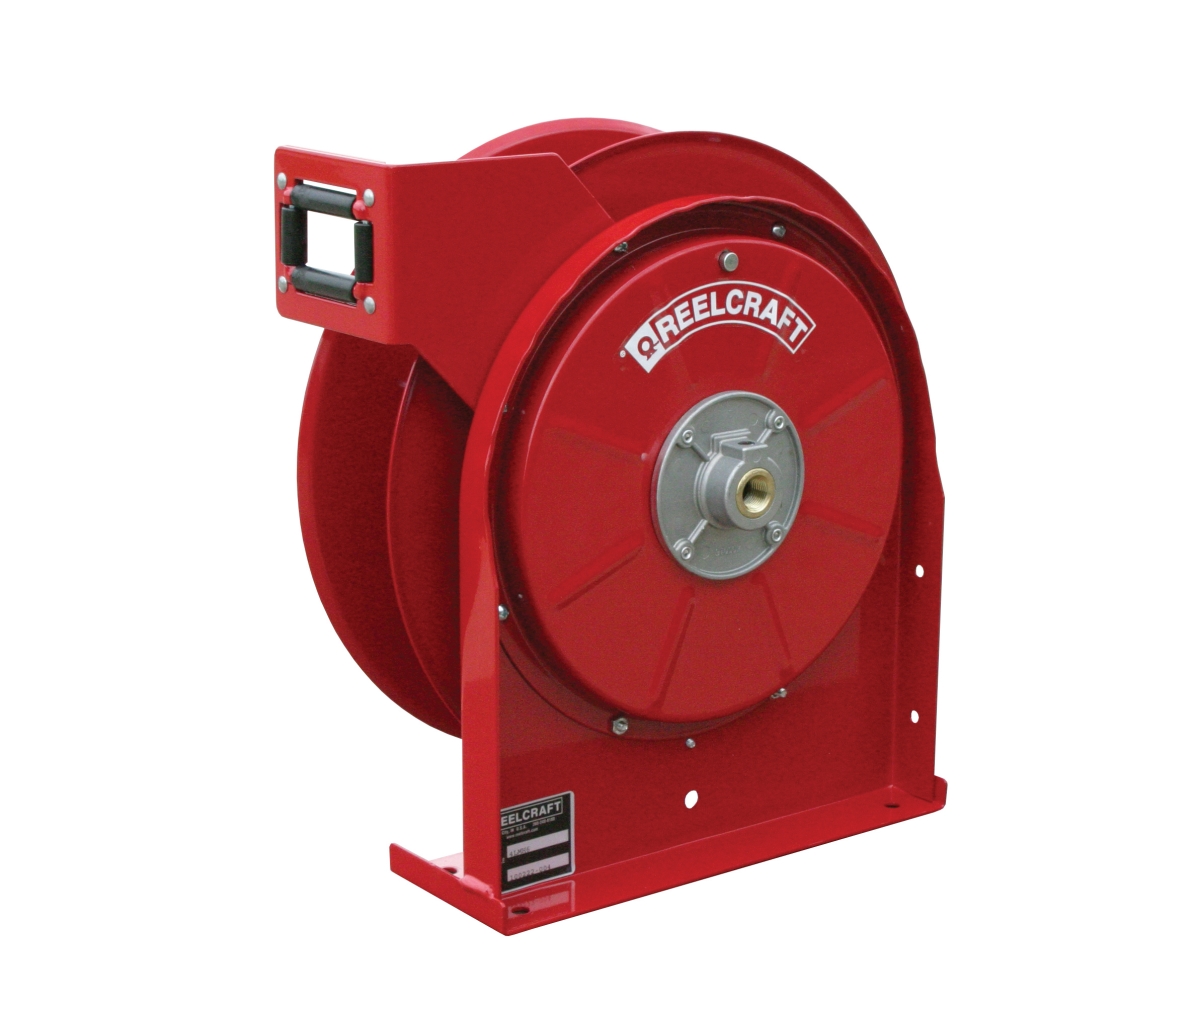 A5800 Omp 0.5 In. X 25 Ft. Premium Duty 3250 Psi Oil Without Hose Reel, Red